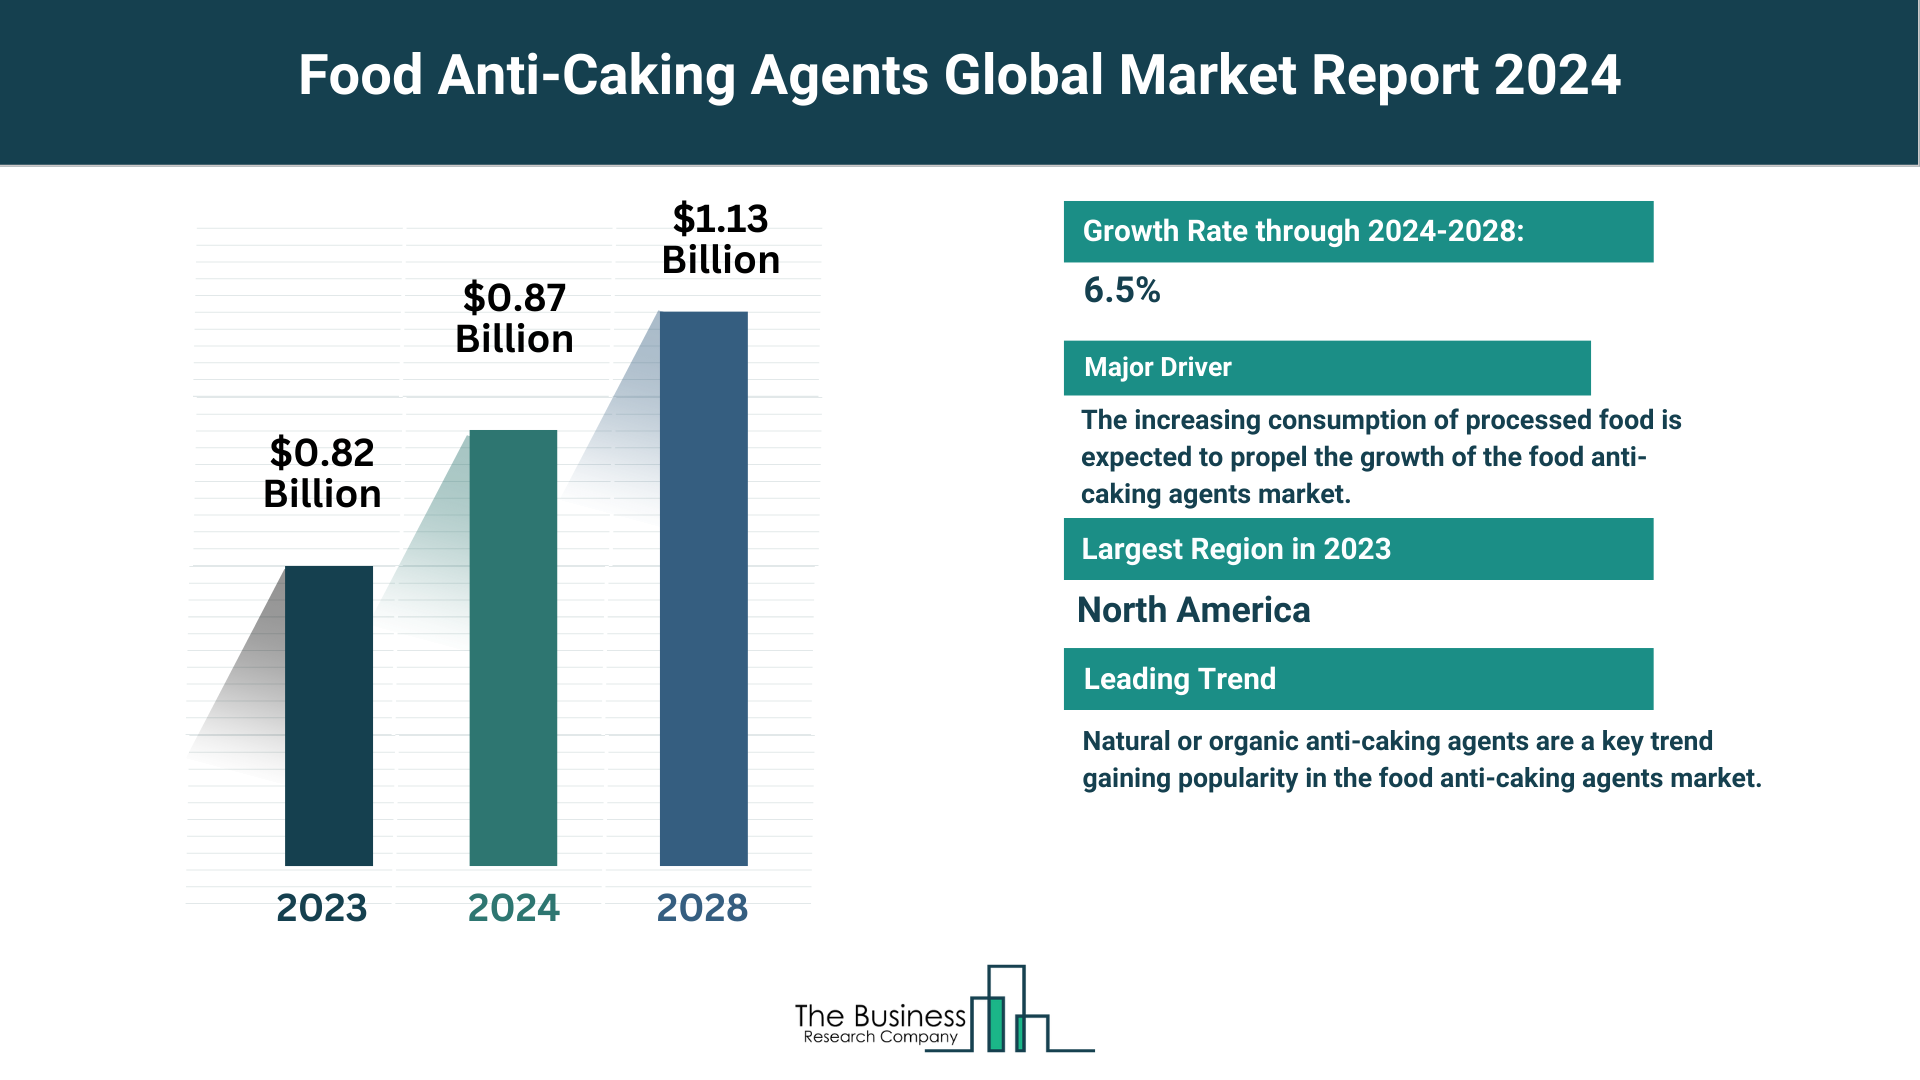 Global Food Anti-Caking Agents Market